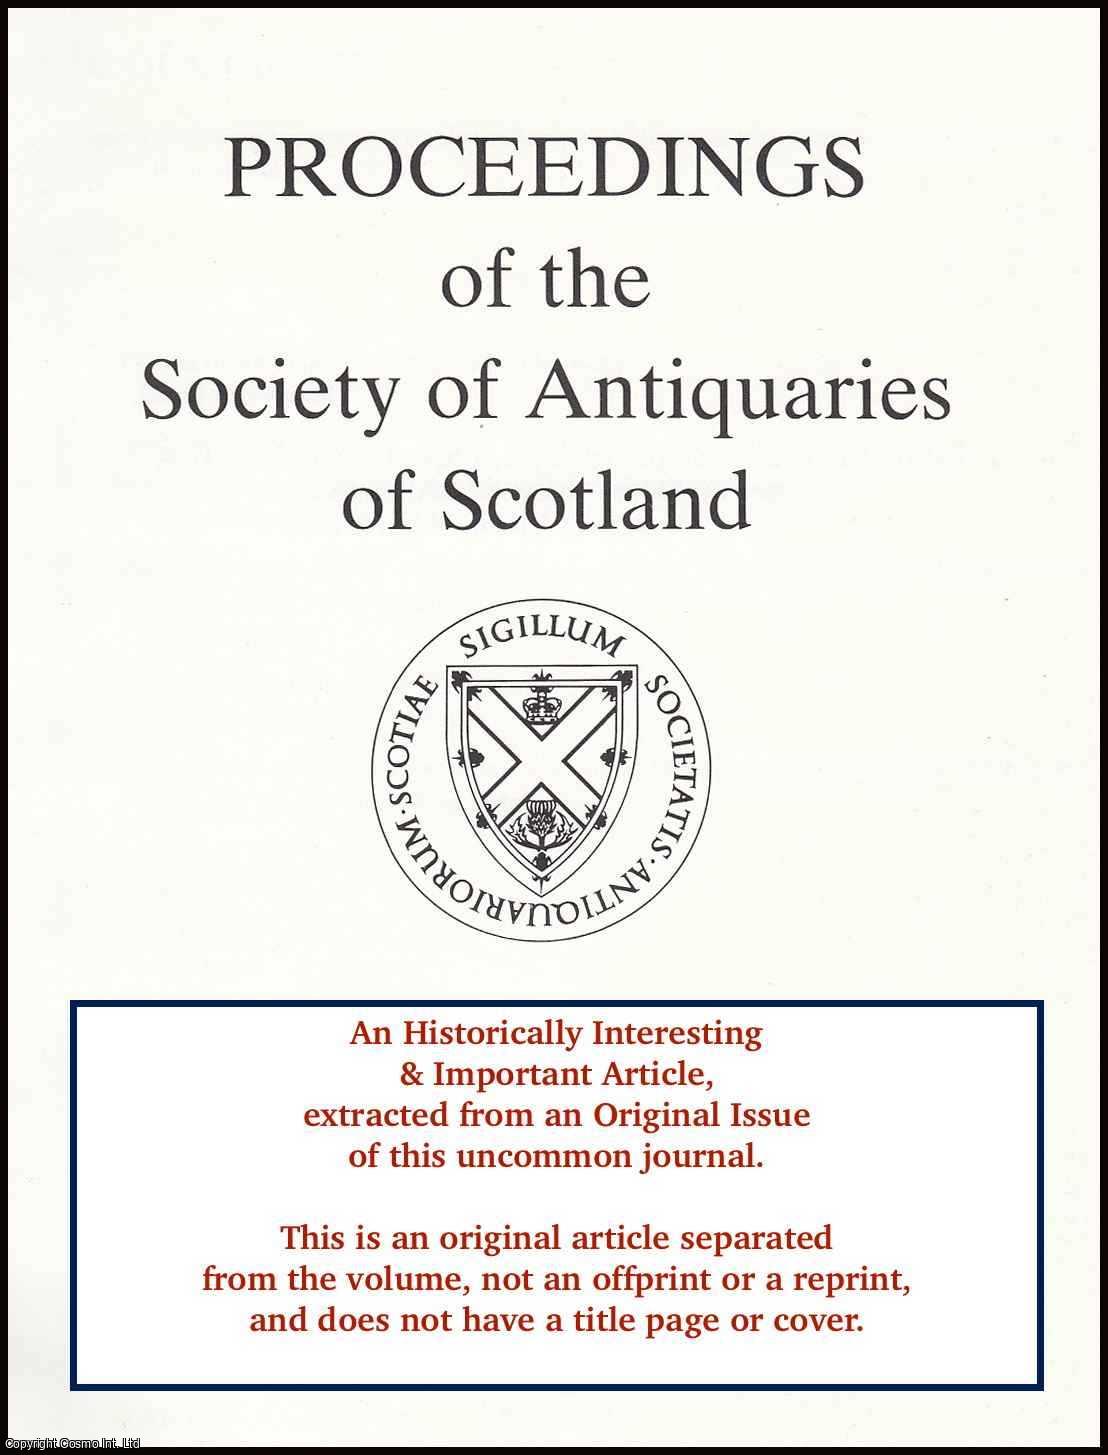 Veitch, Kenneth - The Columban Church in Northern Britain, 664-717: A Reassessment. An original article from the Proceedings of the Society of Antiquaries of Scotland, 1997.